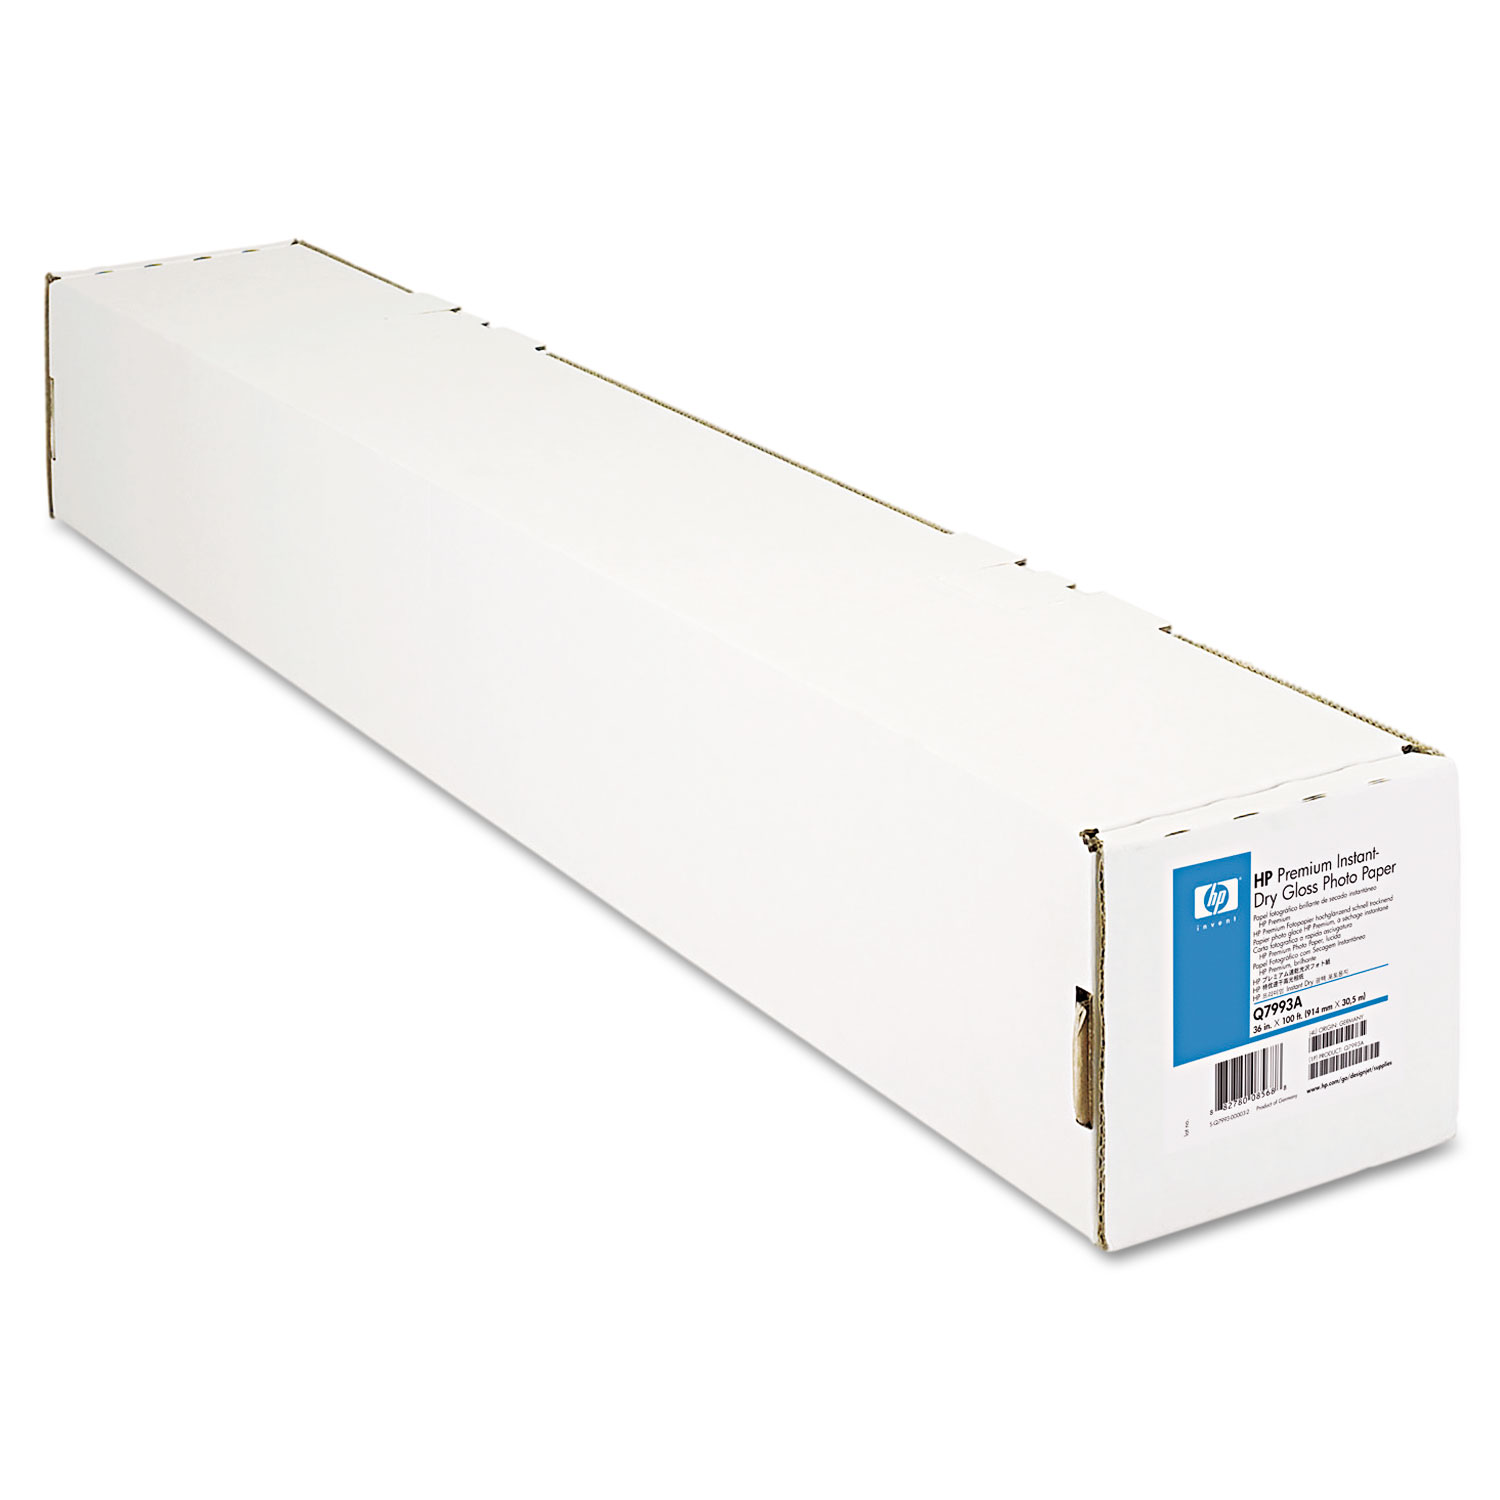  HP Q7993A Premium Instant-Dry Photo Paper, 10.3 mil, 36 x 100 ft, Glossy White (HEWQ7993A) 